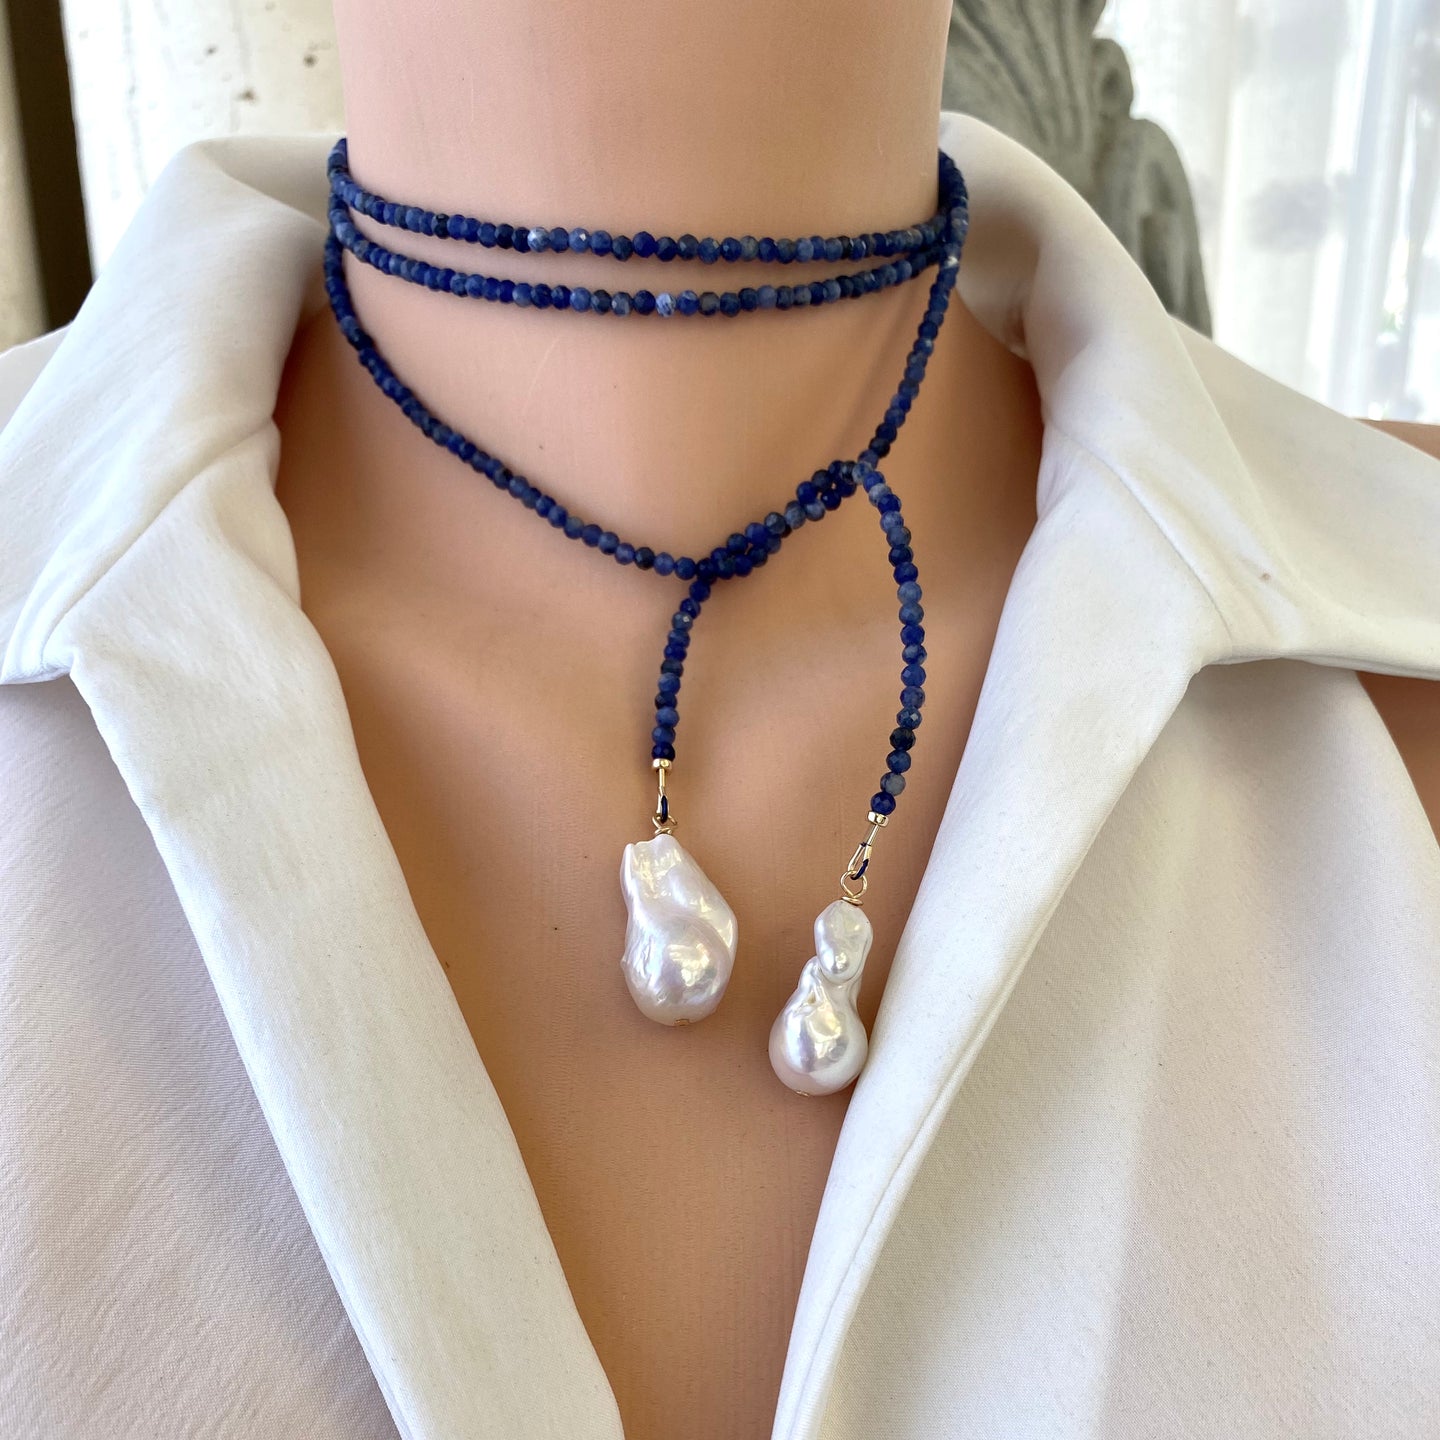 Blue Sodalite Beaded Lariat Necklace and 2 Baroque pearls at each end